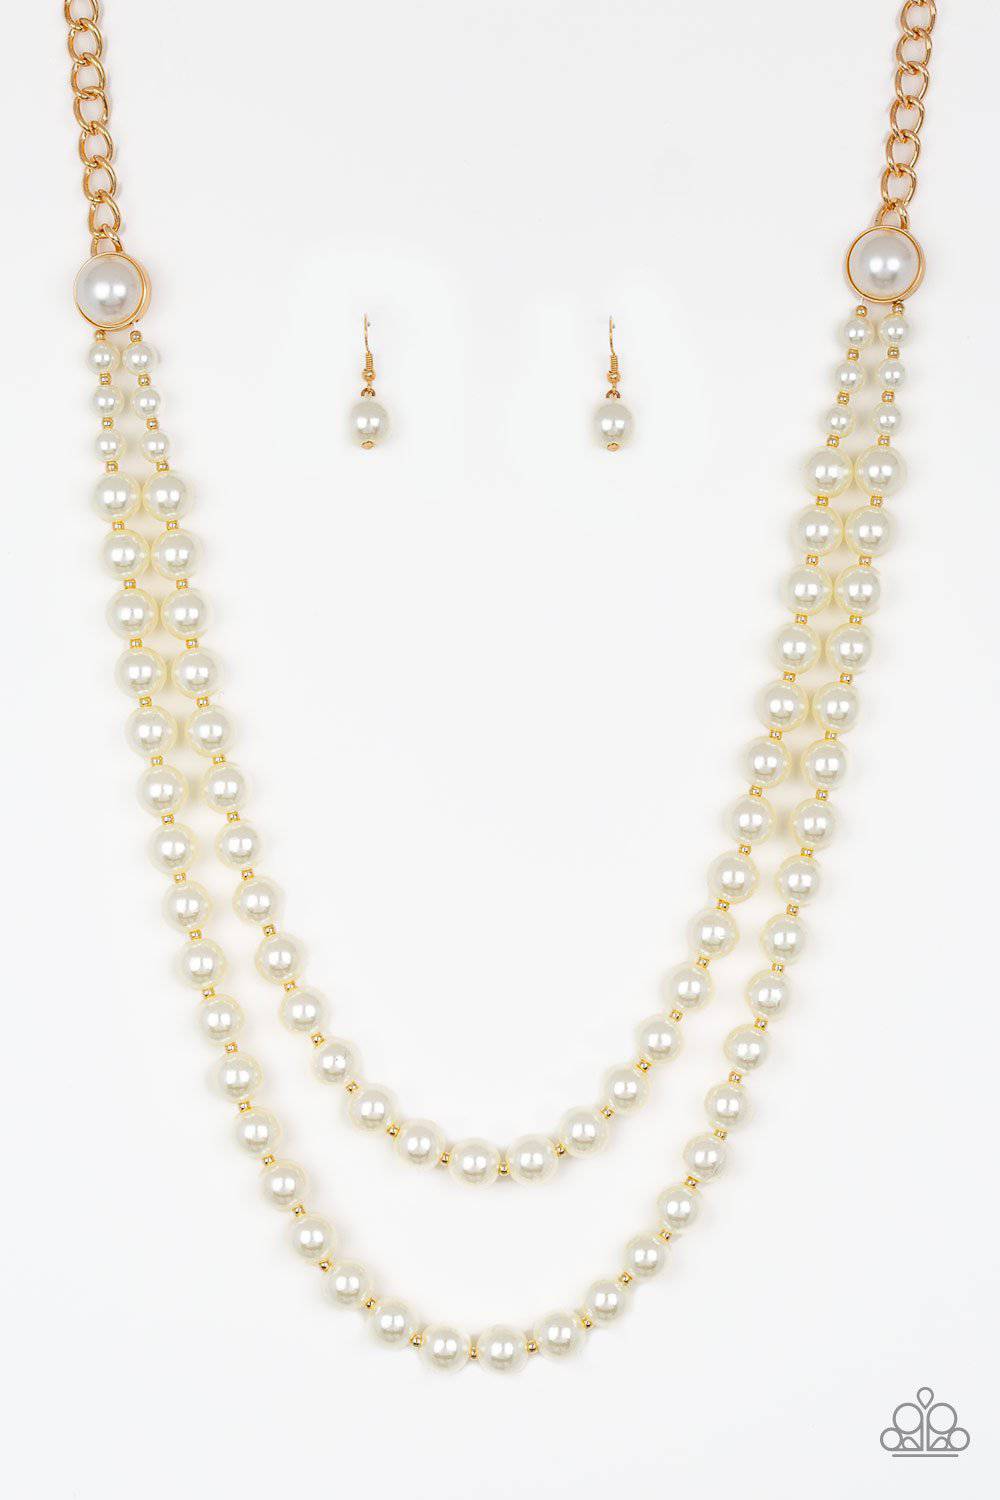 Endless Elegance - Gold & Pearl Necklace - Paparazzi Accessories - GlaMarous Titi Jewels